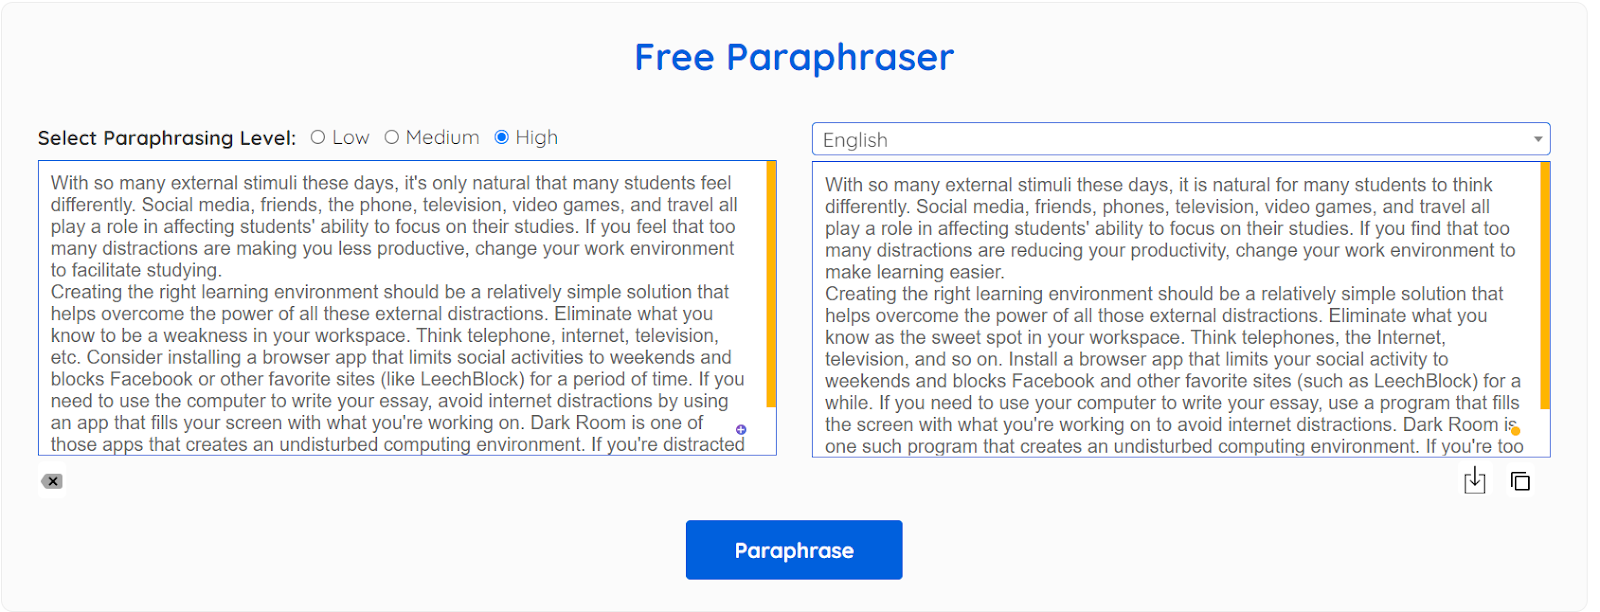 Free Paraphraser | Paraphrasingtool.ai Vs Paraphraser.ai: Which One Is Better?